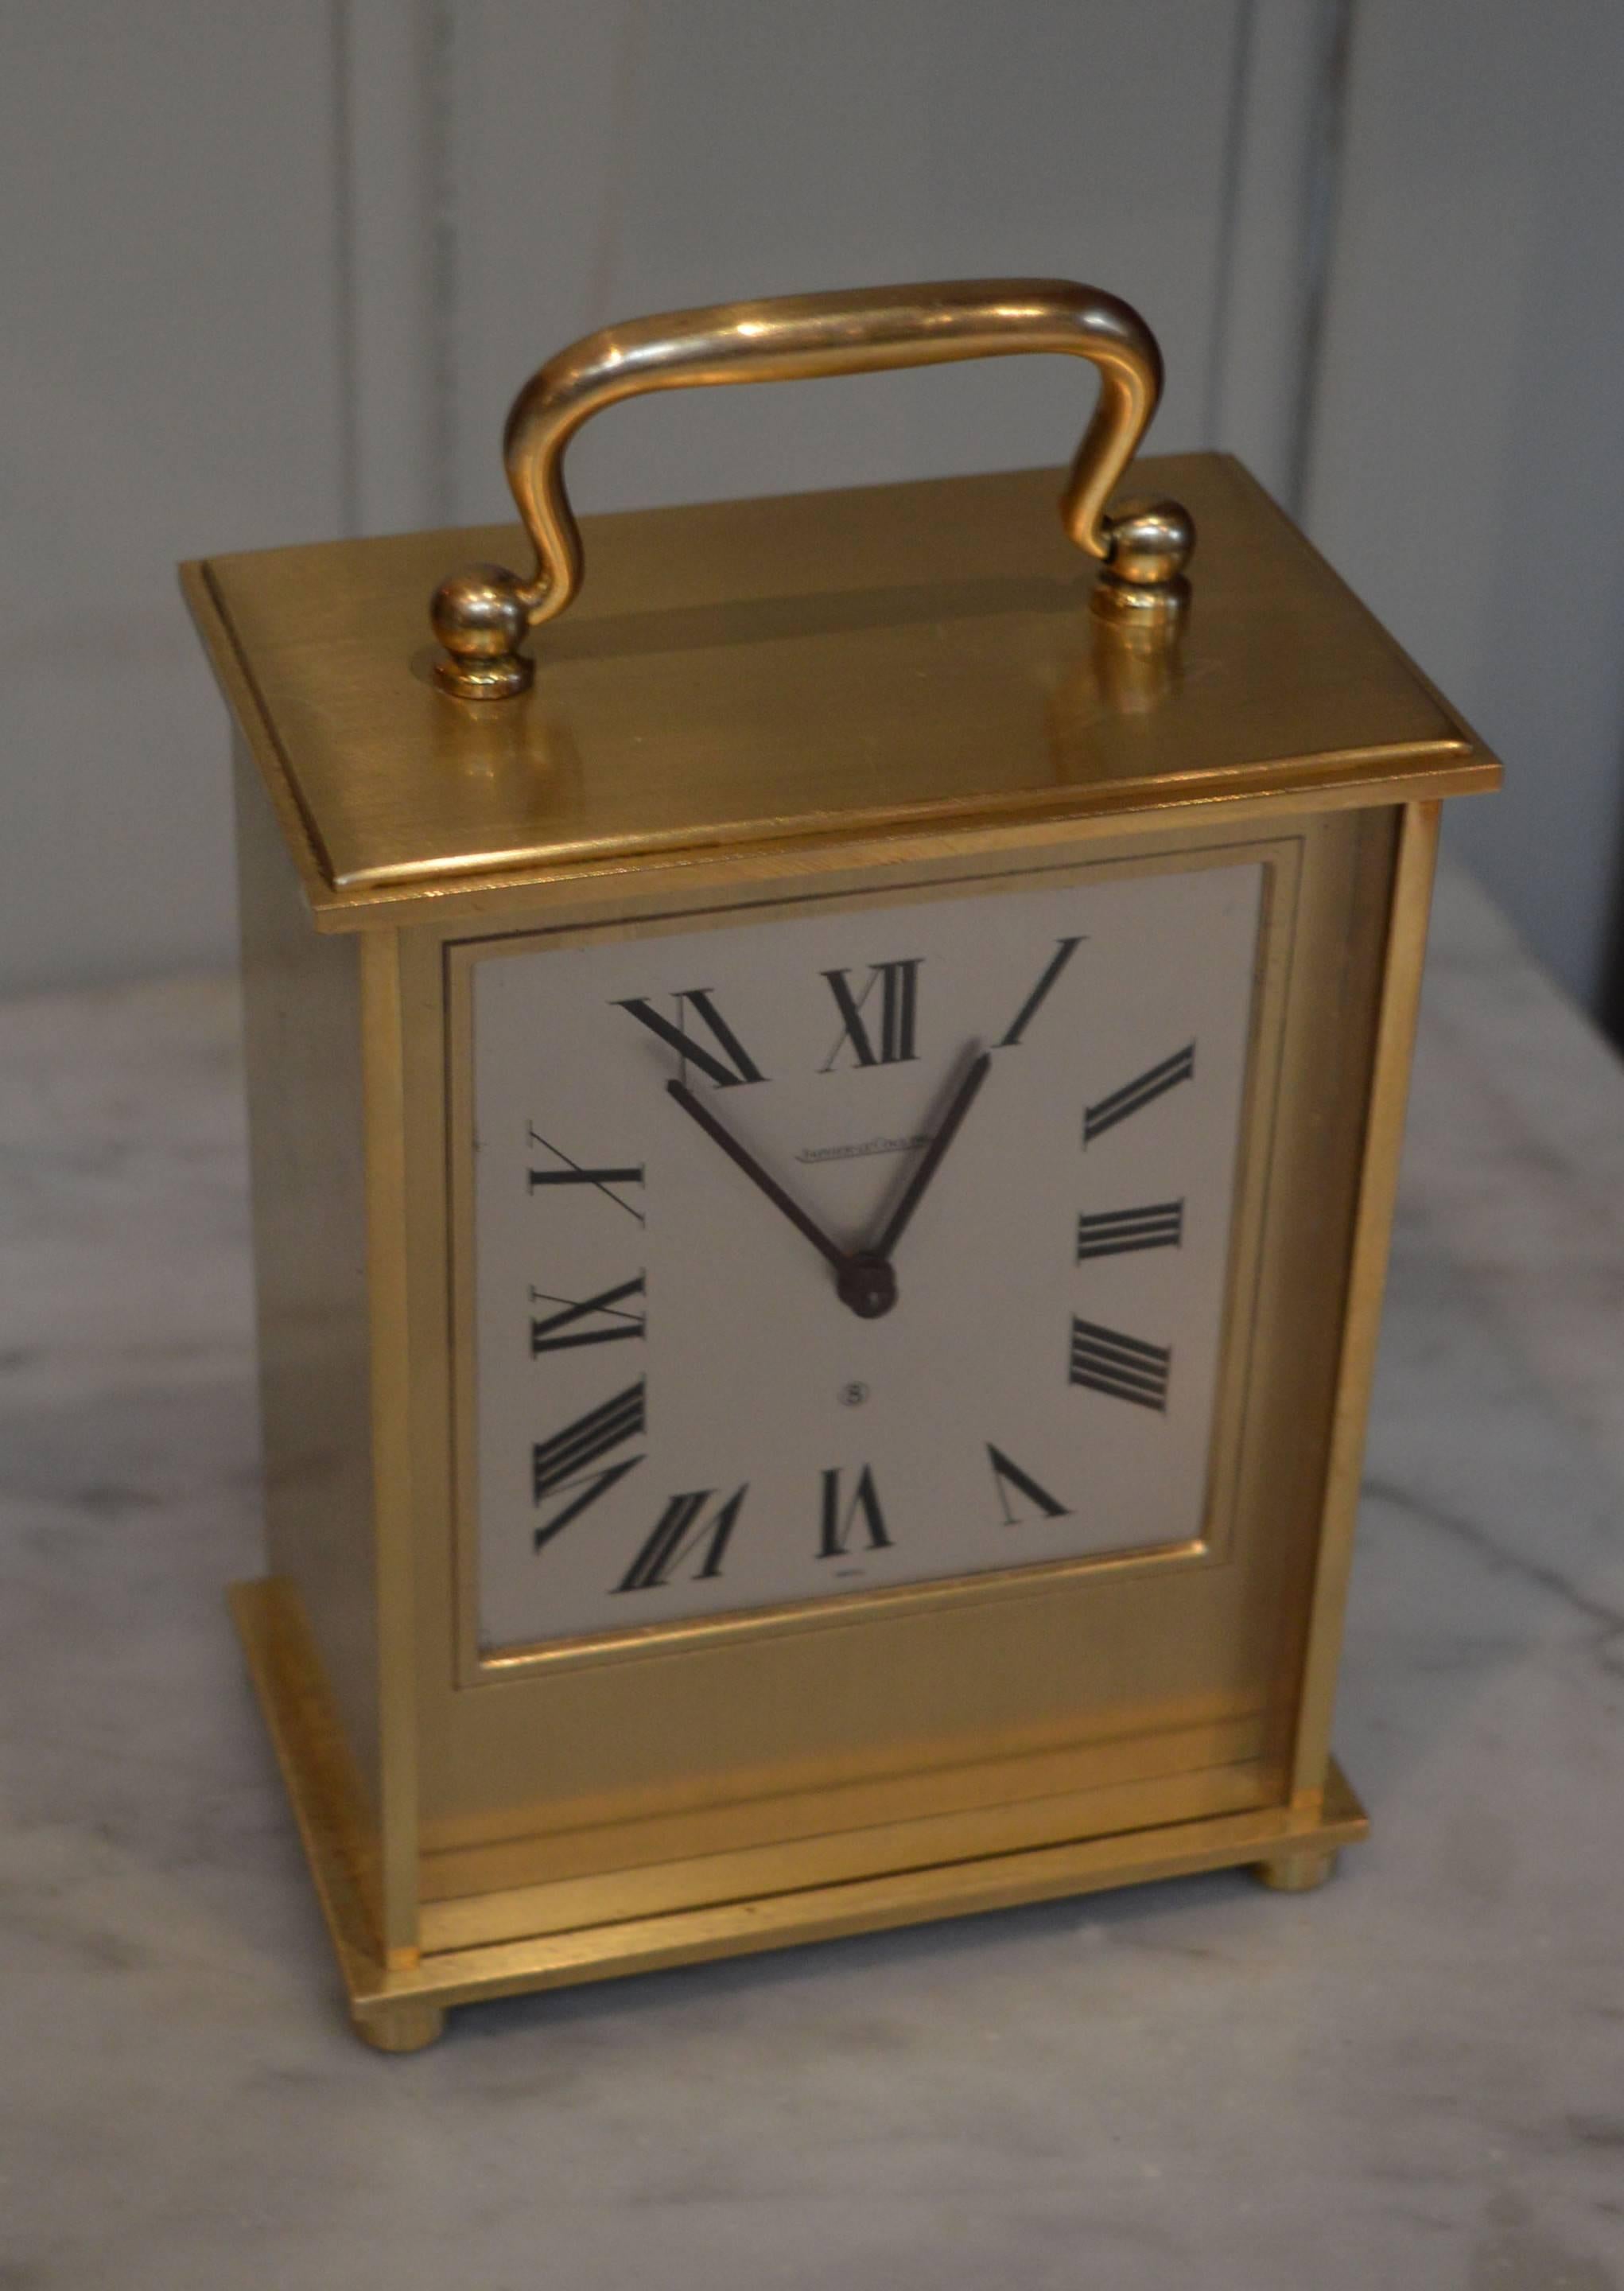 An 8 day, solid brushed brass carriage clock by Jaeger-LeCoultre. It has an 8 day movement that sounds the hours on a large bell, mounted within the casing but surrounding the movement.